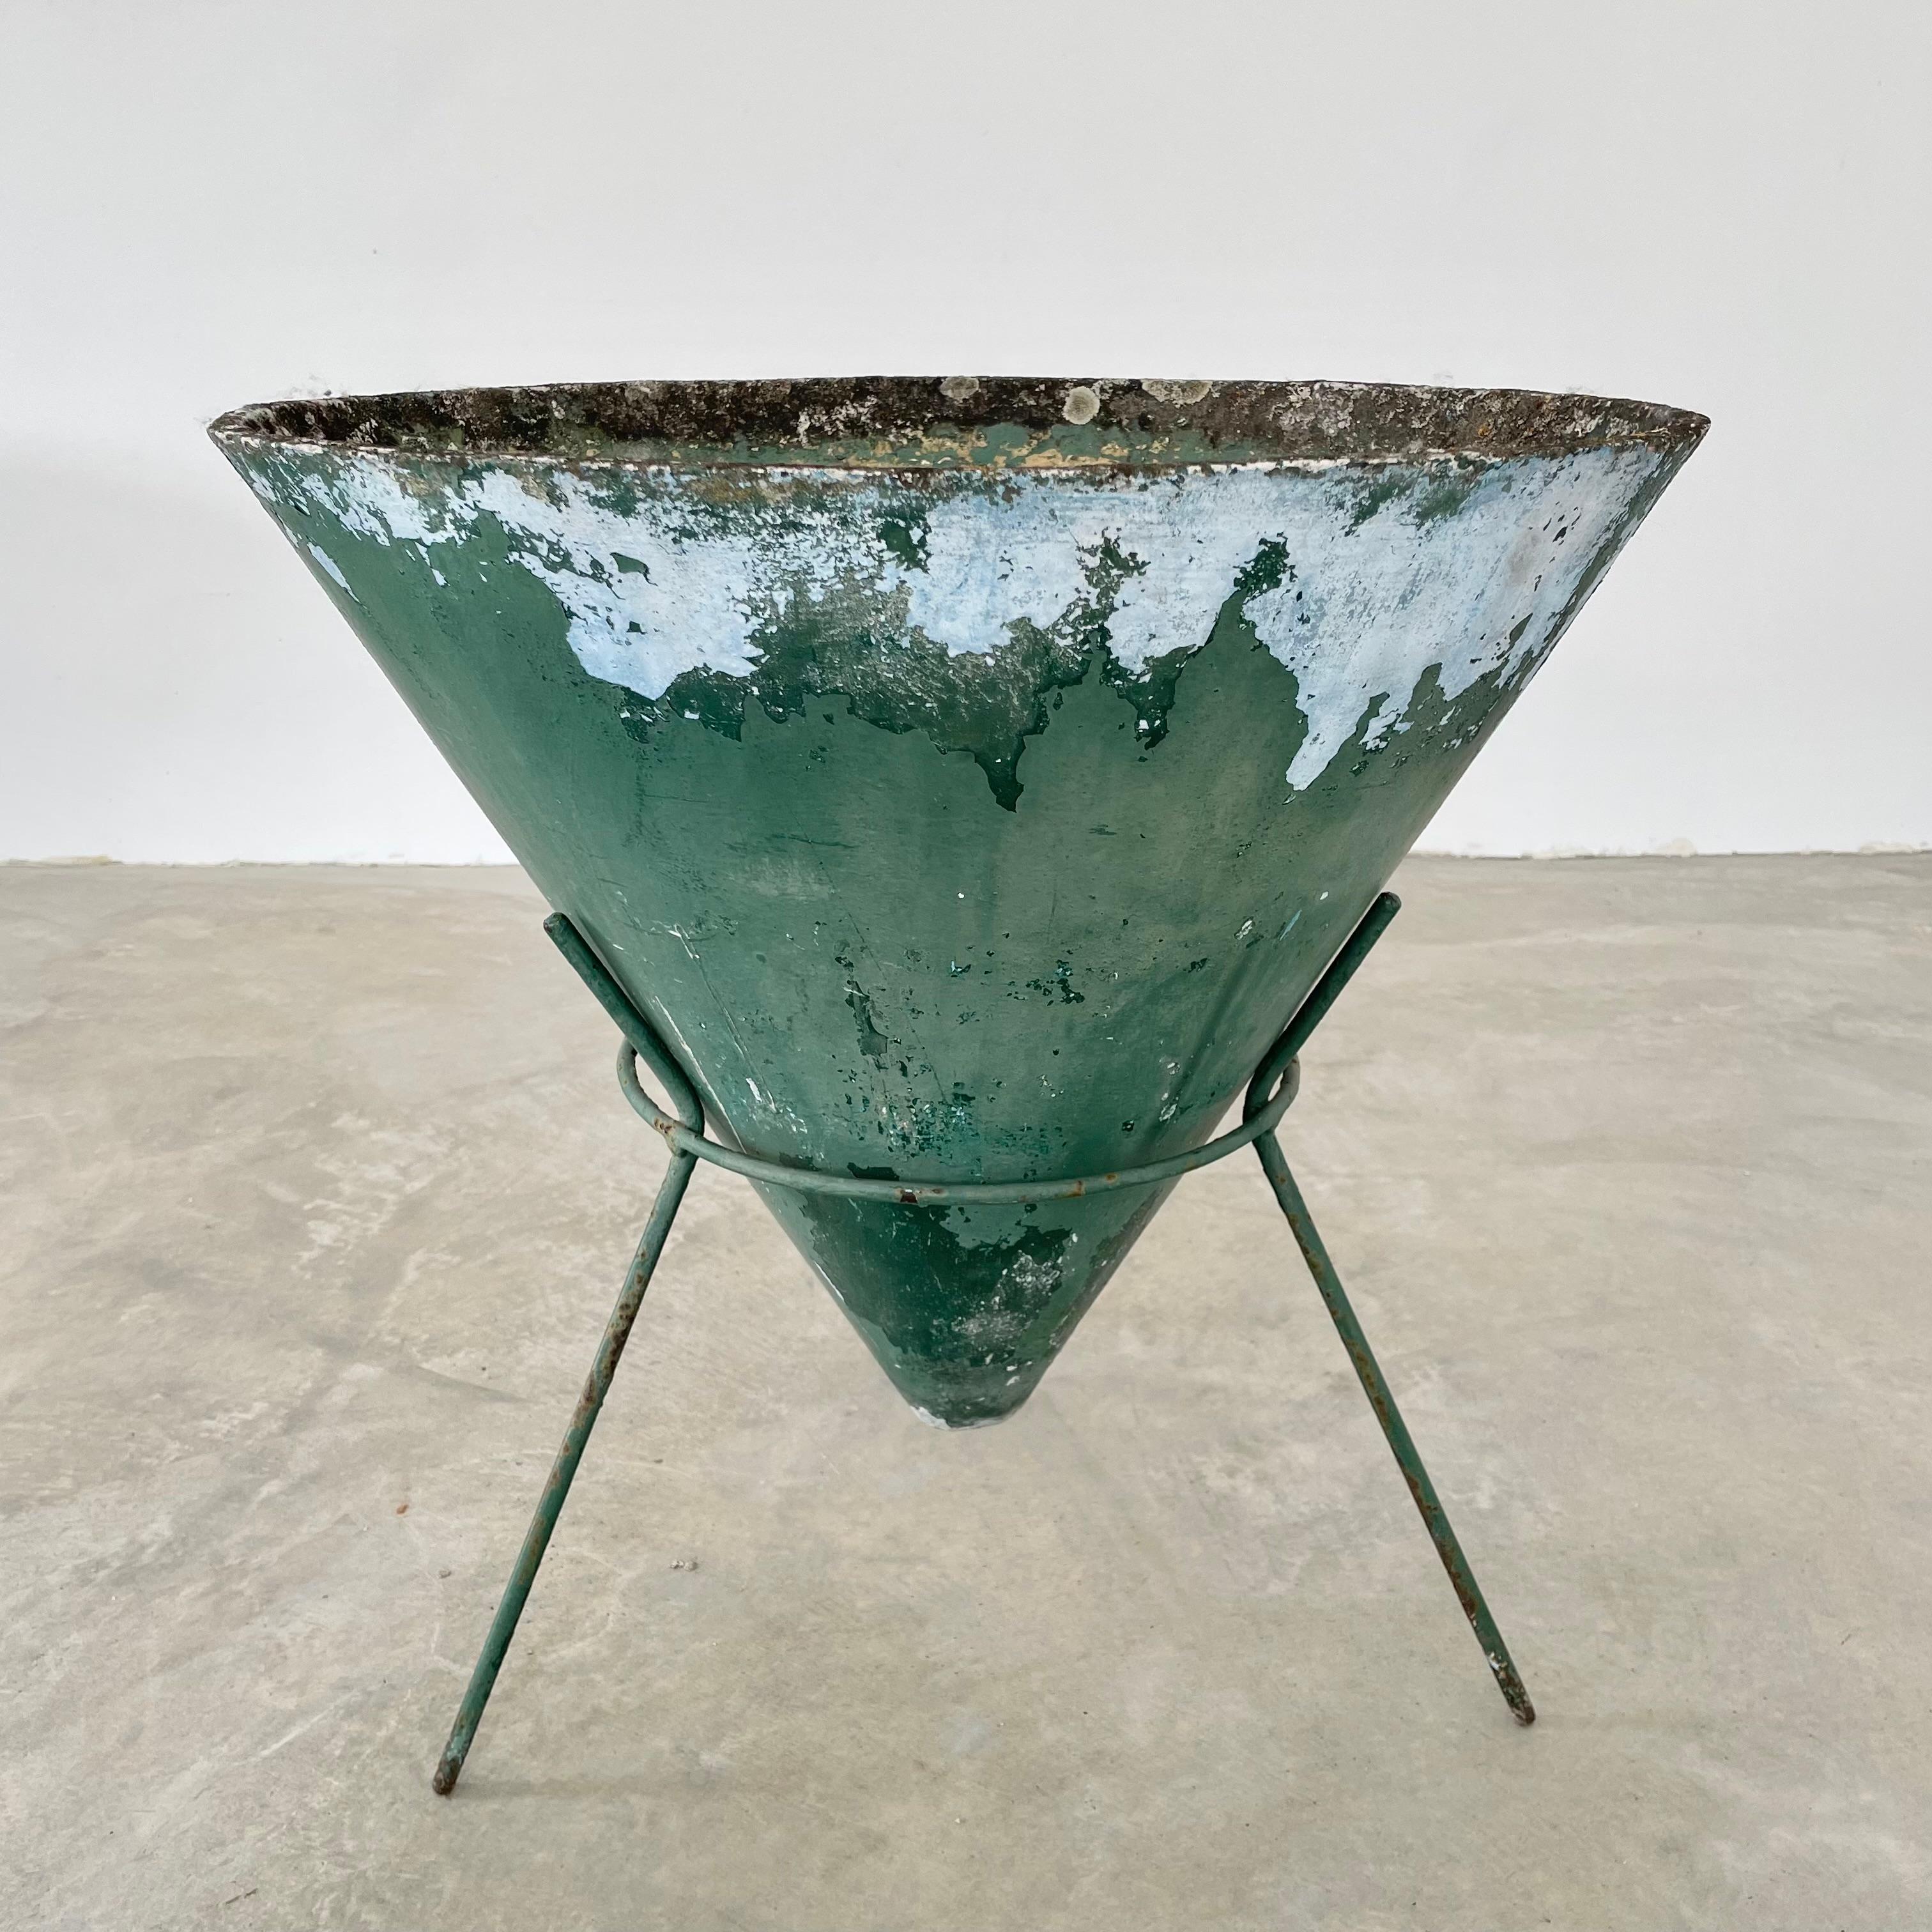 Green cone planter by Will Guhl made in the 1960s, Switzerland. Inverted concrete cone sits comfortably in an iron tripod Stand. Great patina and layers of green coloring to planter. Bottom of cone floats a few inches off of the ground. 4 matching